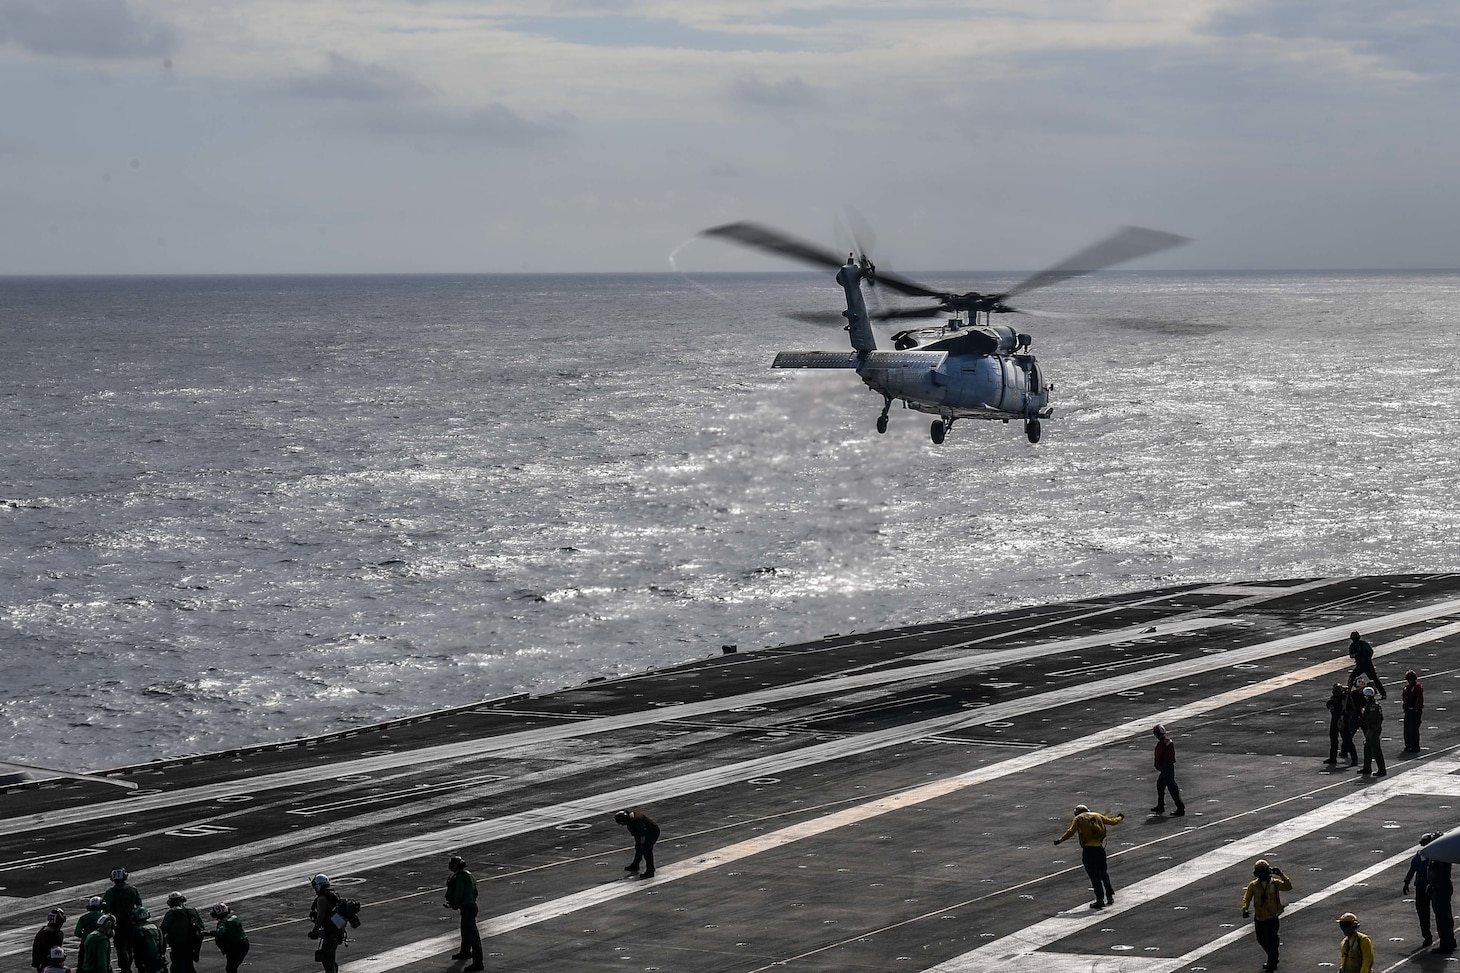 An MH-60S Sea Hawk, assigned to the “Black Knights” of Helicopter Maritime Strike Squadron (HSC) 4, lifts off the flight deck of the Nimitz-class aircraft carrier USS Carl Vinson (CVN 70).